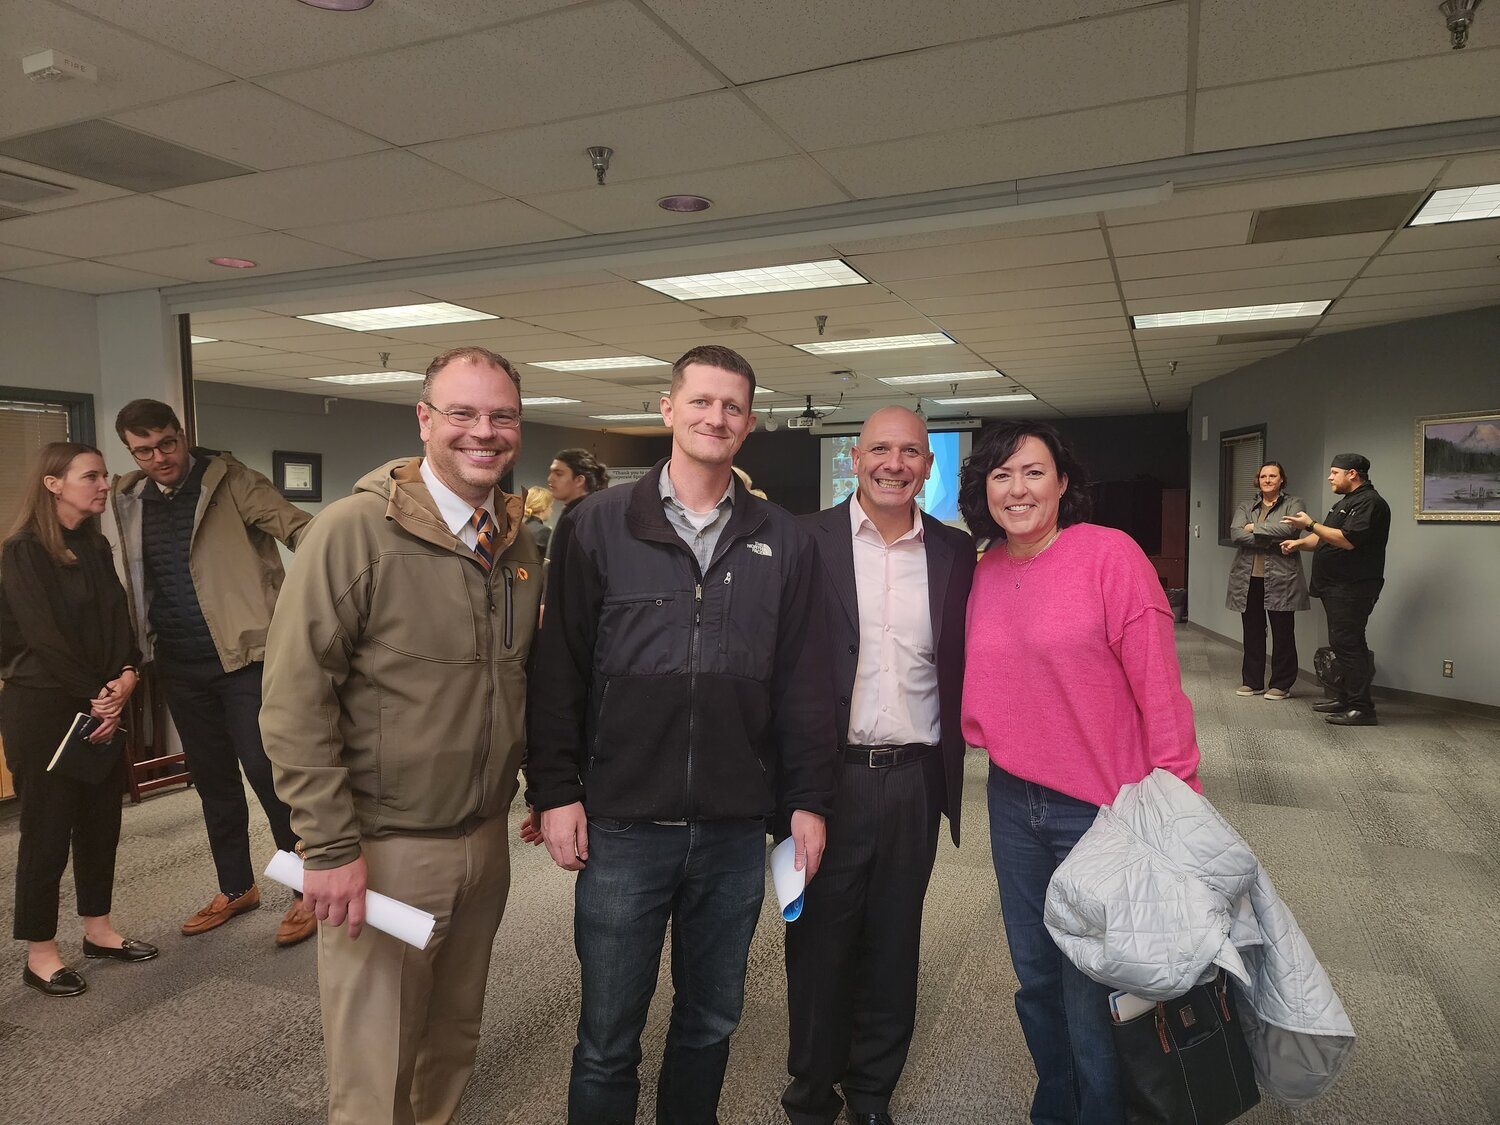 The tour included four state representatives on the House Capital Budget Committee: Greg Cheney, R-Battle Ground, Joel McEntire, R-Cathlamet, Peter Abbarno, R-Centralia, and Stephanie McClintock, R-Vancouver.